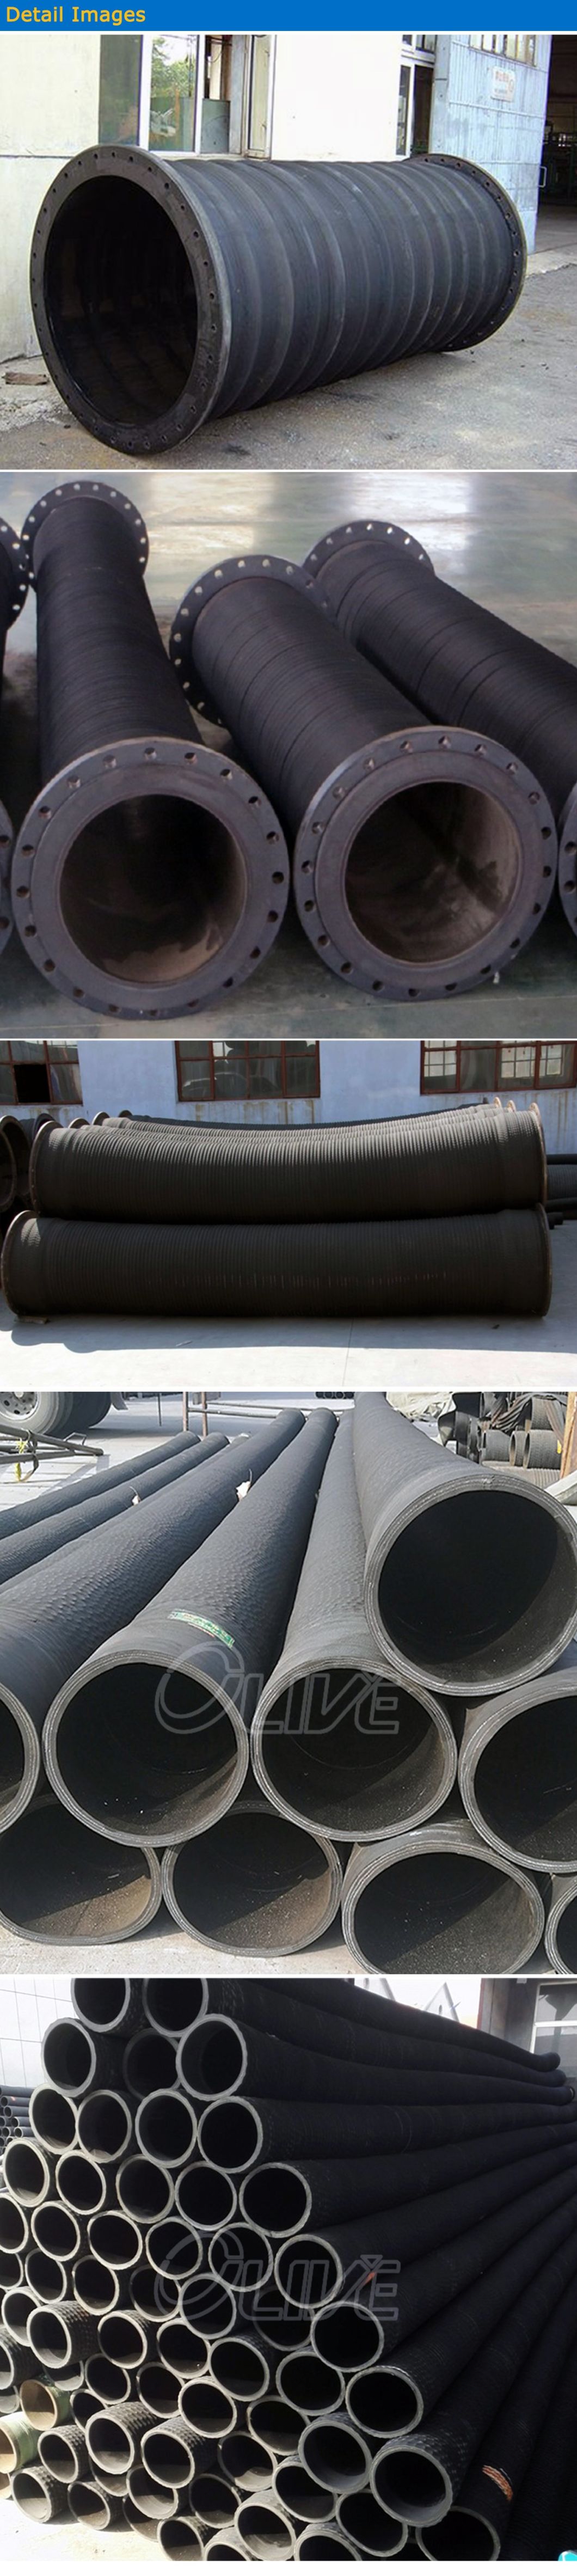 8 Inch Oilfield Suction Hose Hydraulic Oil Discharge Hose